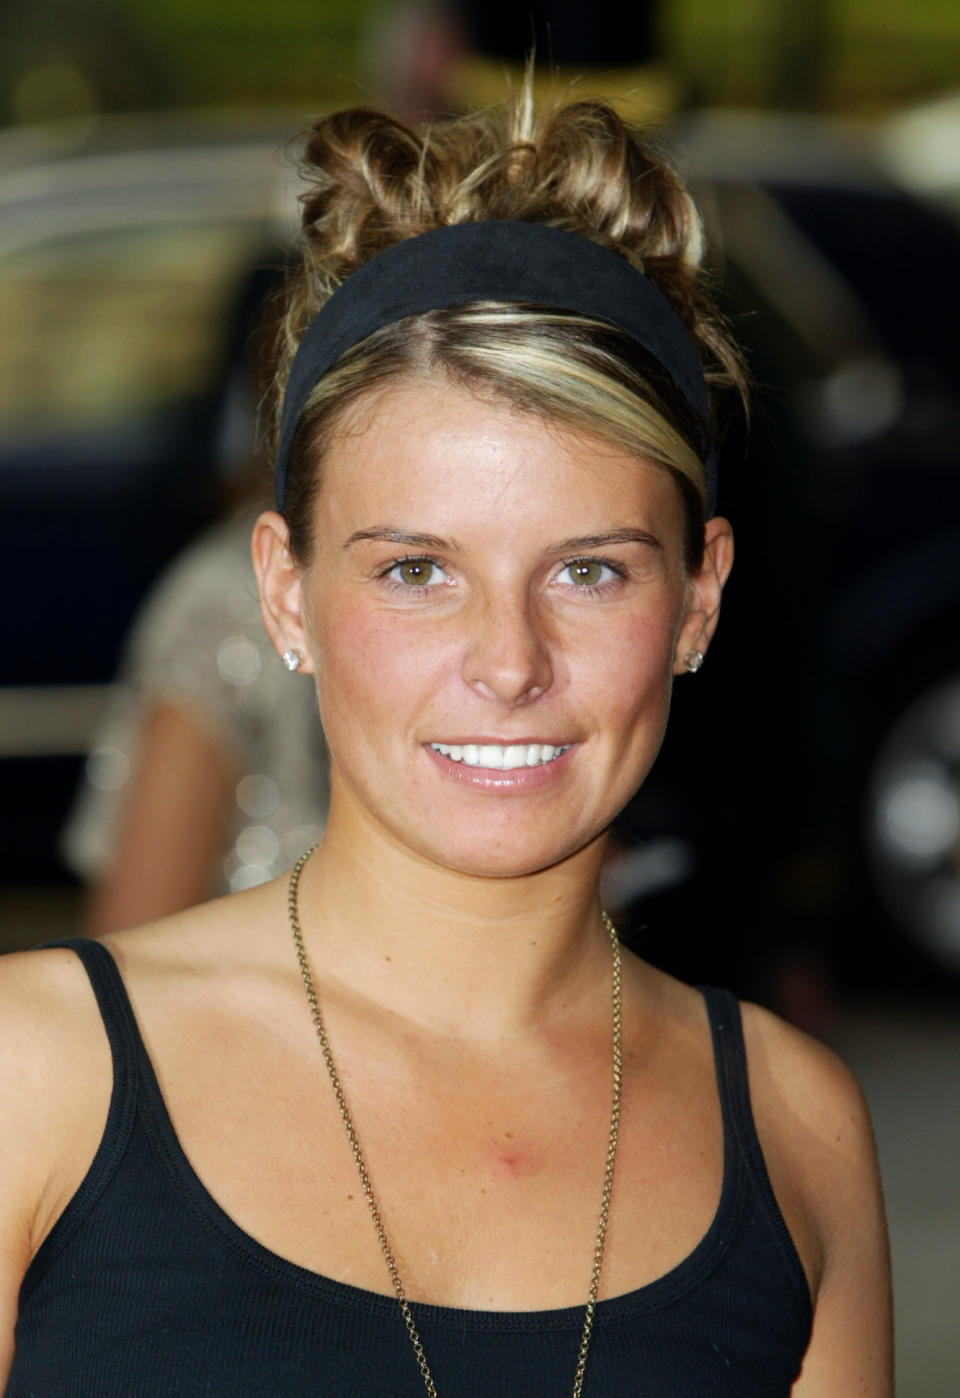 Coleen Rooney in black headband back in 2005 attending The Closer Young Heroes Awards At The Dorchester, London. (Getty Images)